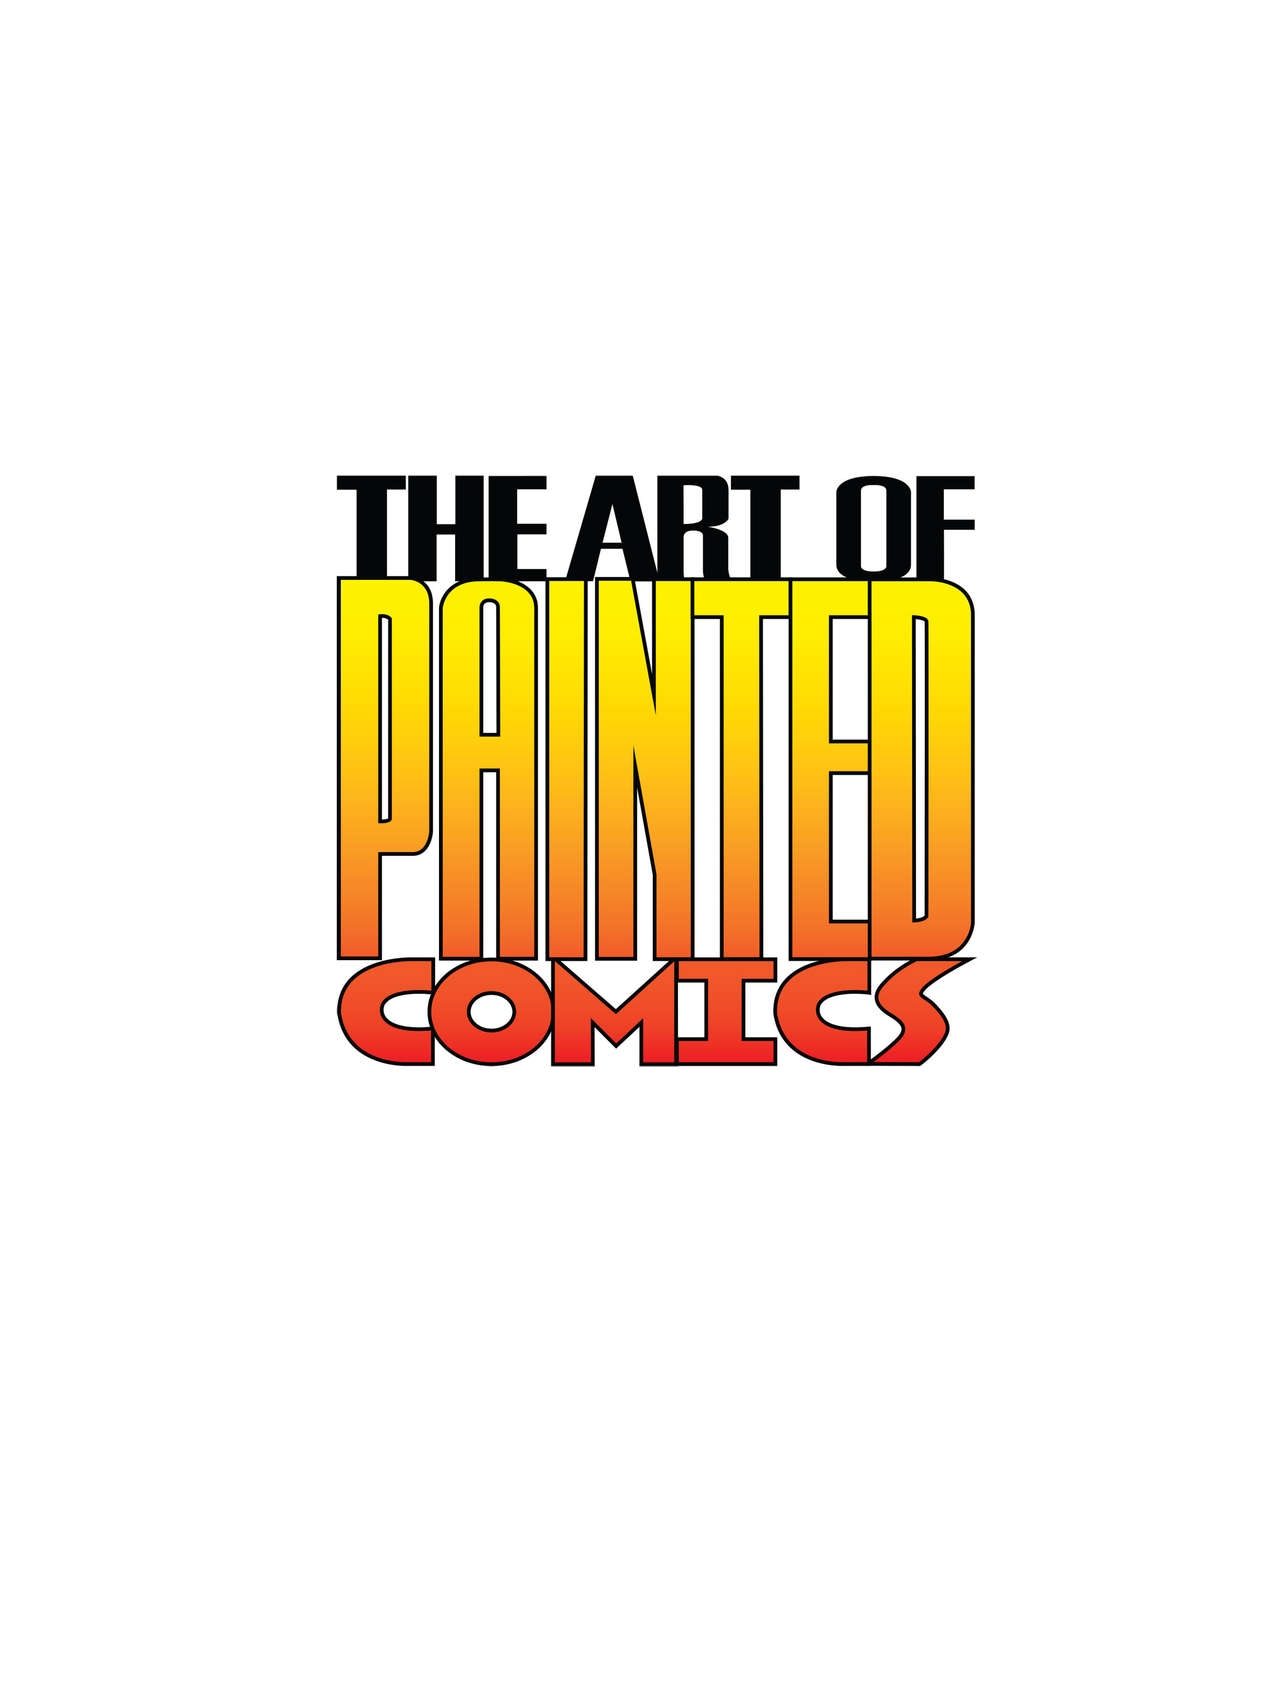 The Art Of Painted Comics 2